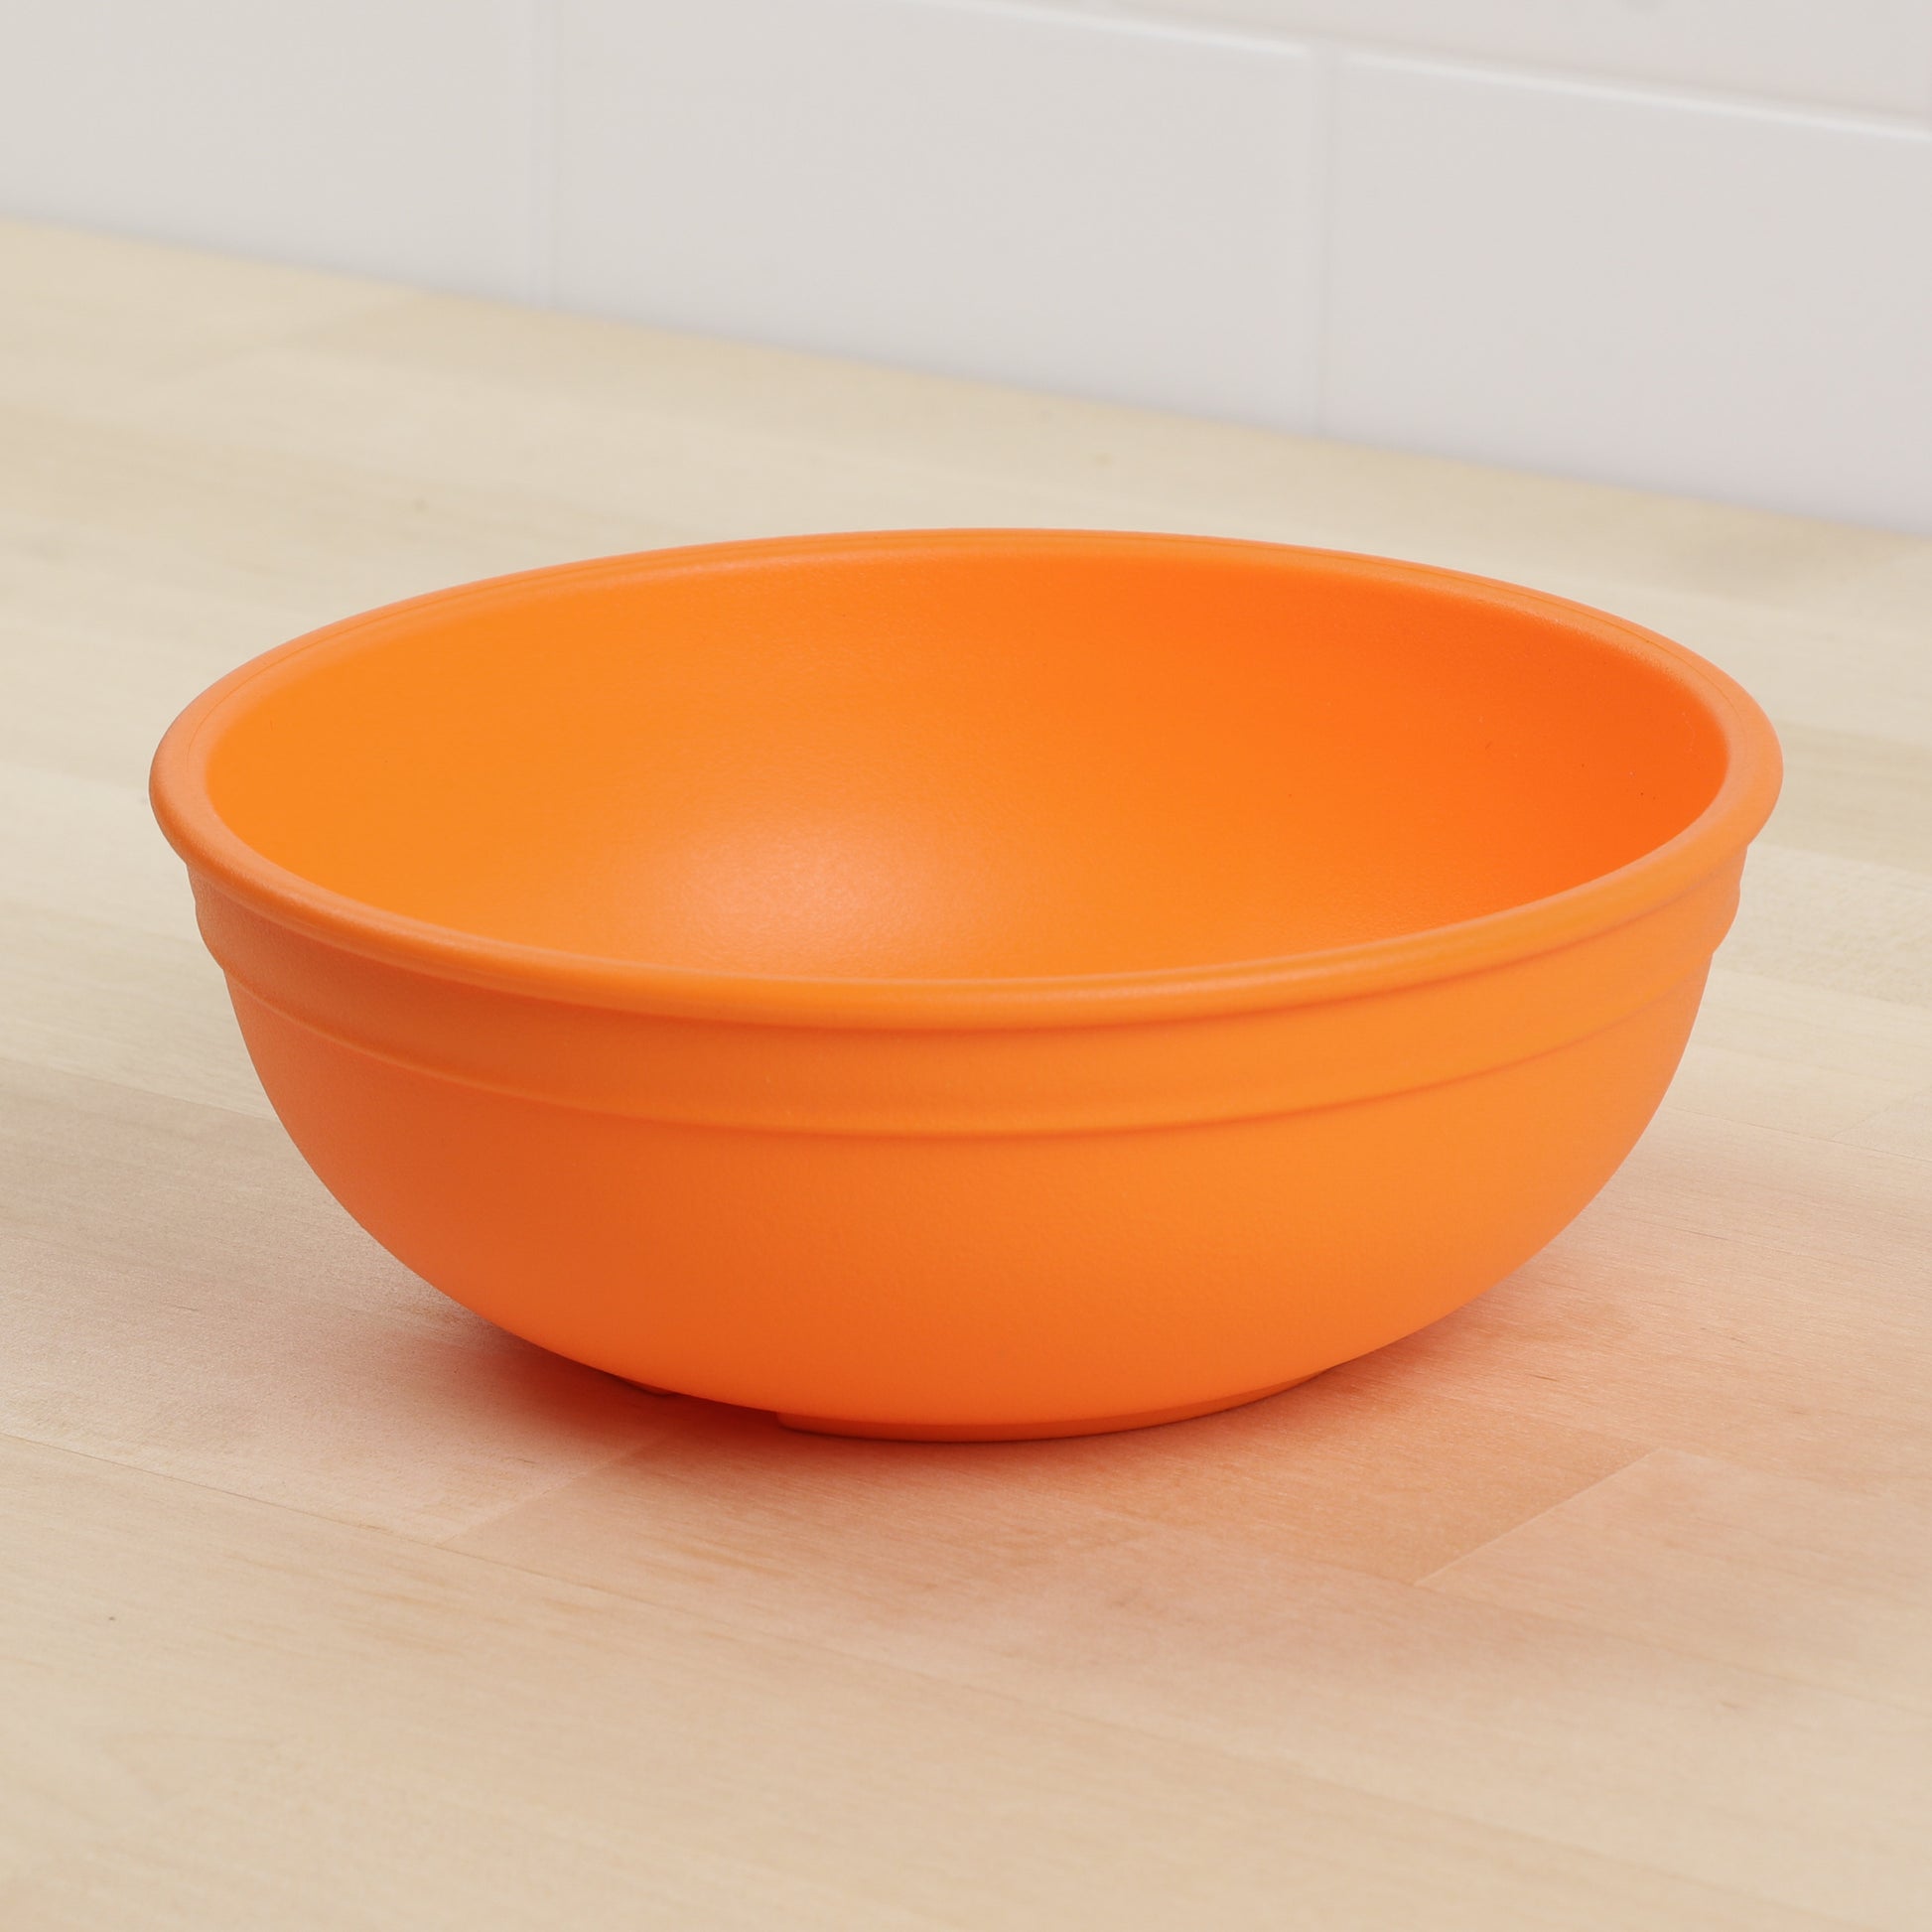 Re-Play Bowl | Orange Large Size from Bear & Moo